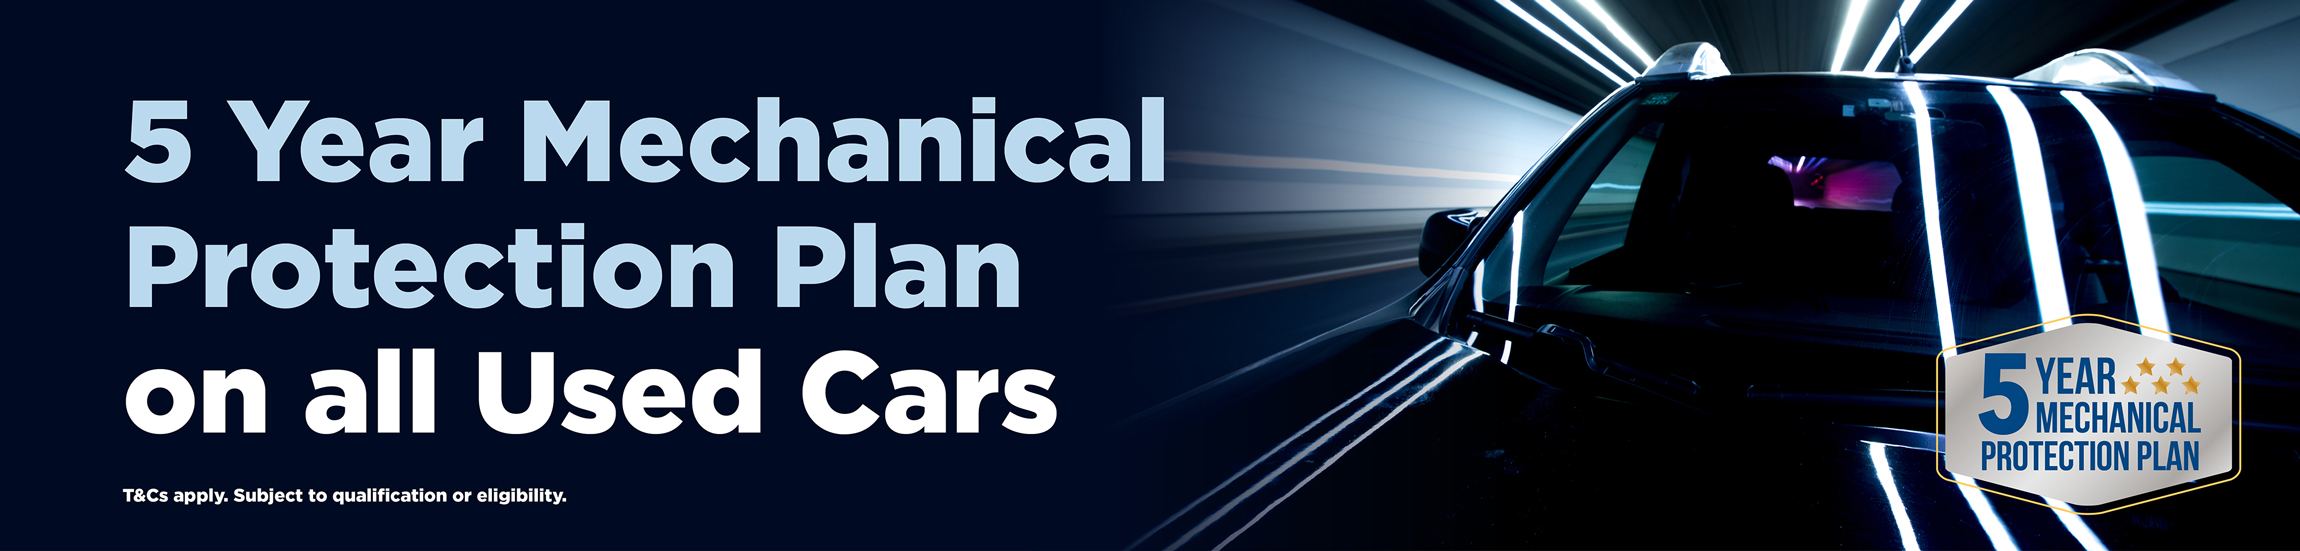 5 Year Mechanical Protection Plan on all Used Cars Website Banner